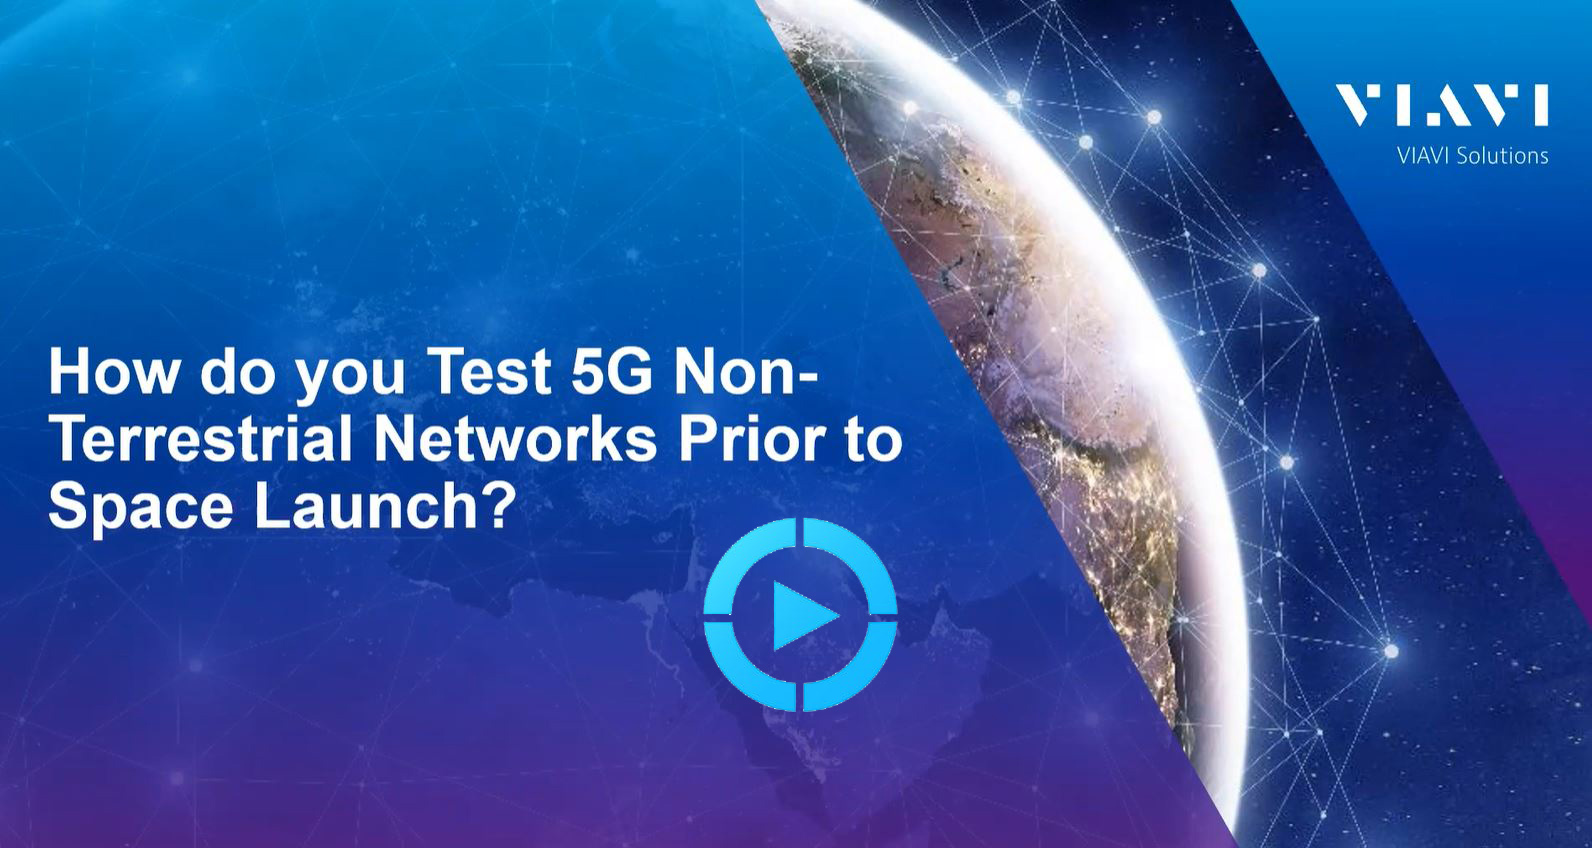 How do you test 5G Non-Terrestrial Networks prior to space launch?